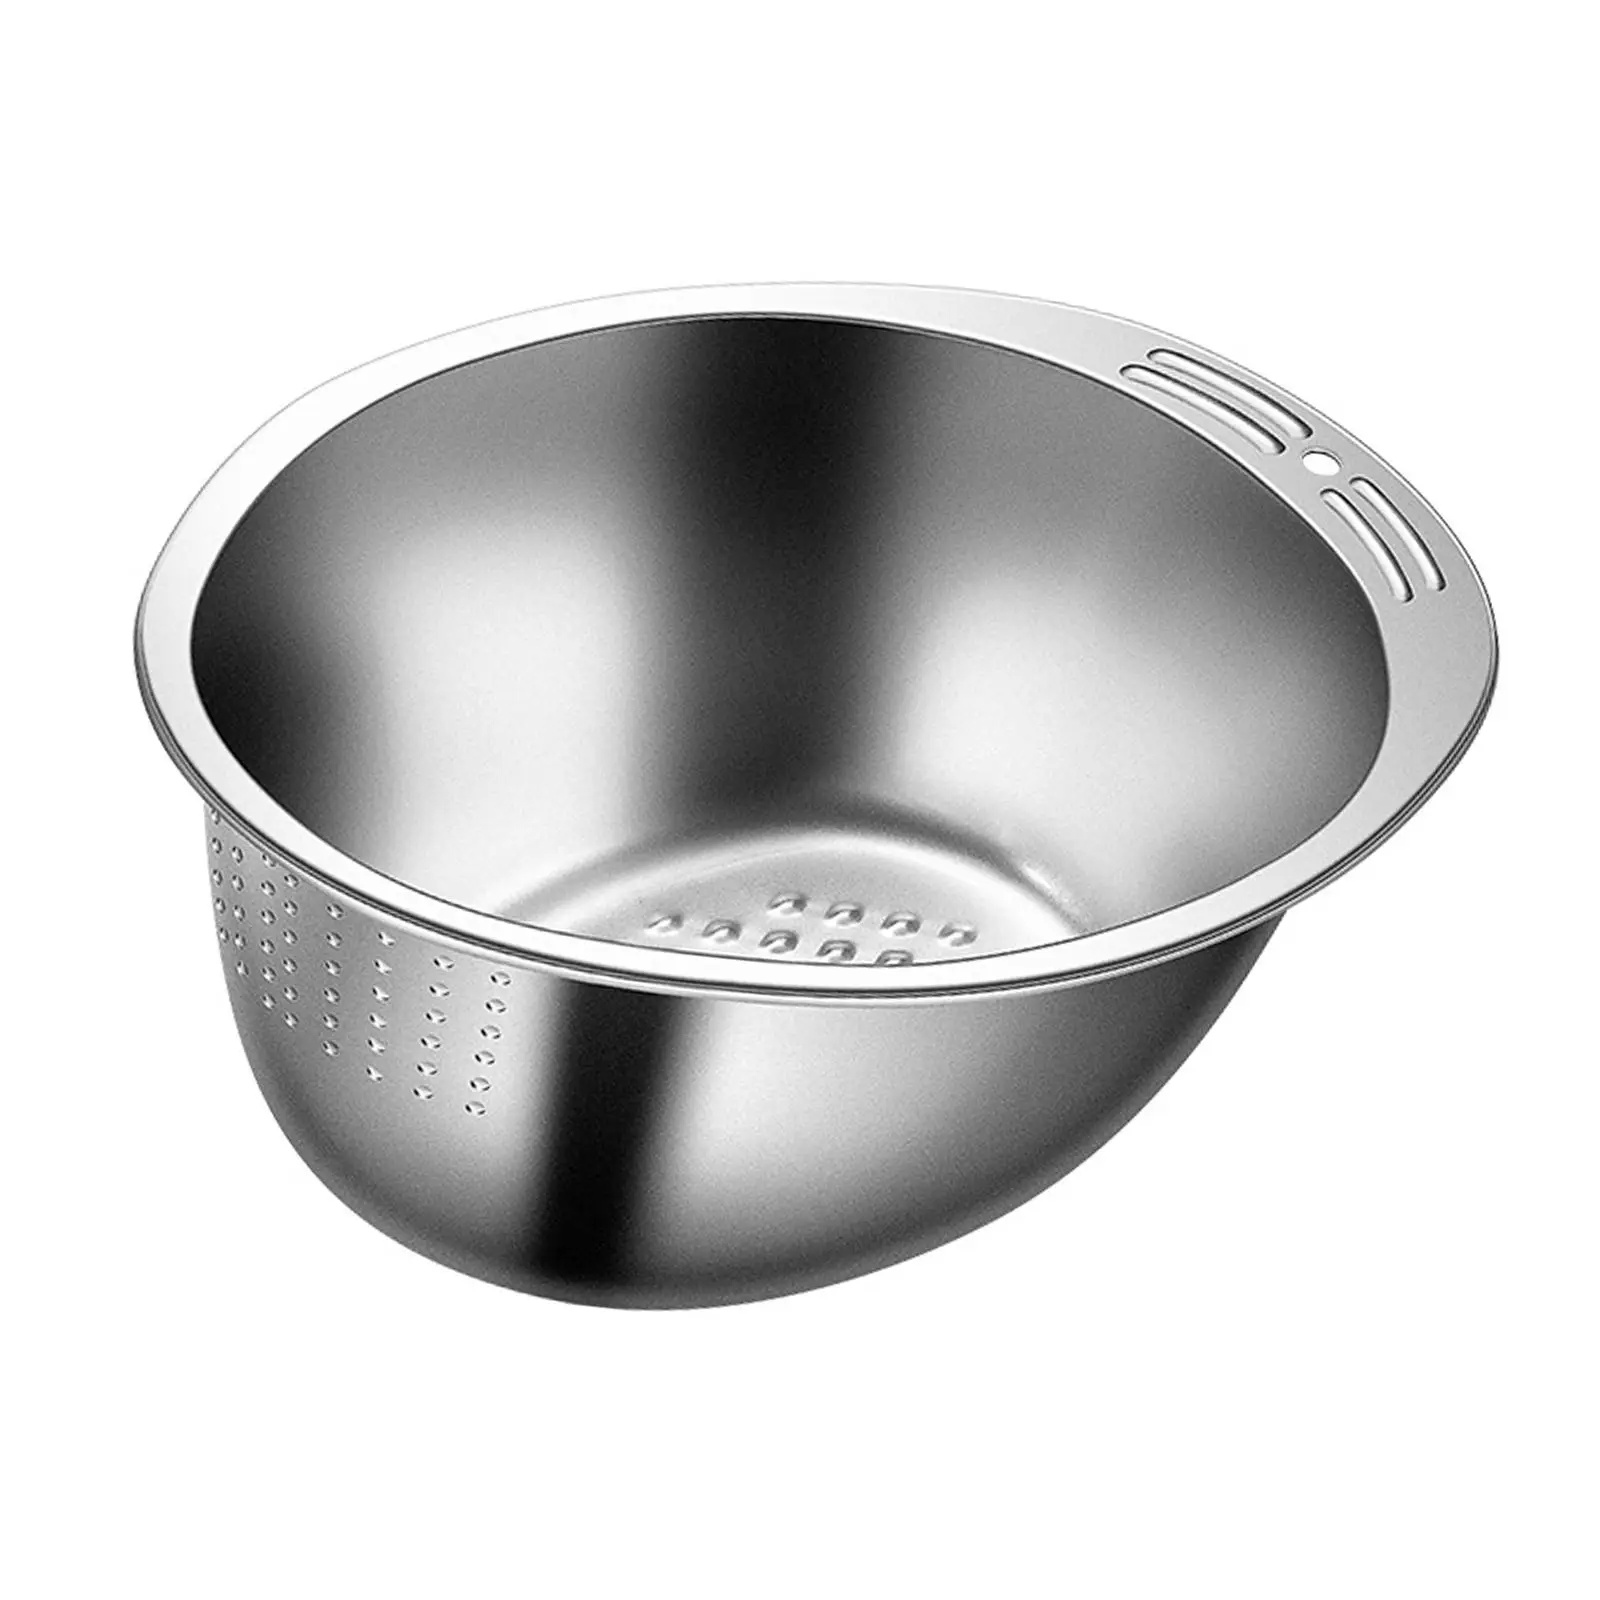 Kitchen Colander Strainer Food Cleaning Strainer Sink Colander Strainer Colander for Fruits Tomatoes Carrots Rice Beans